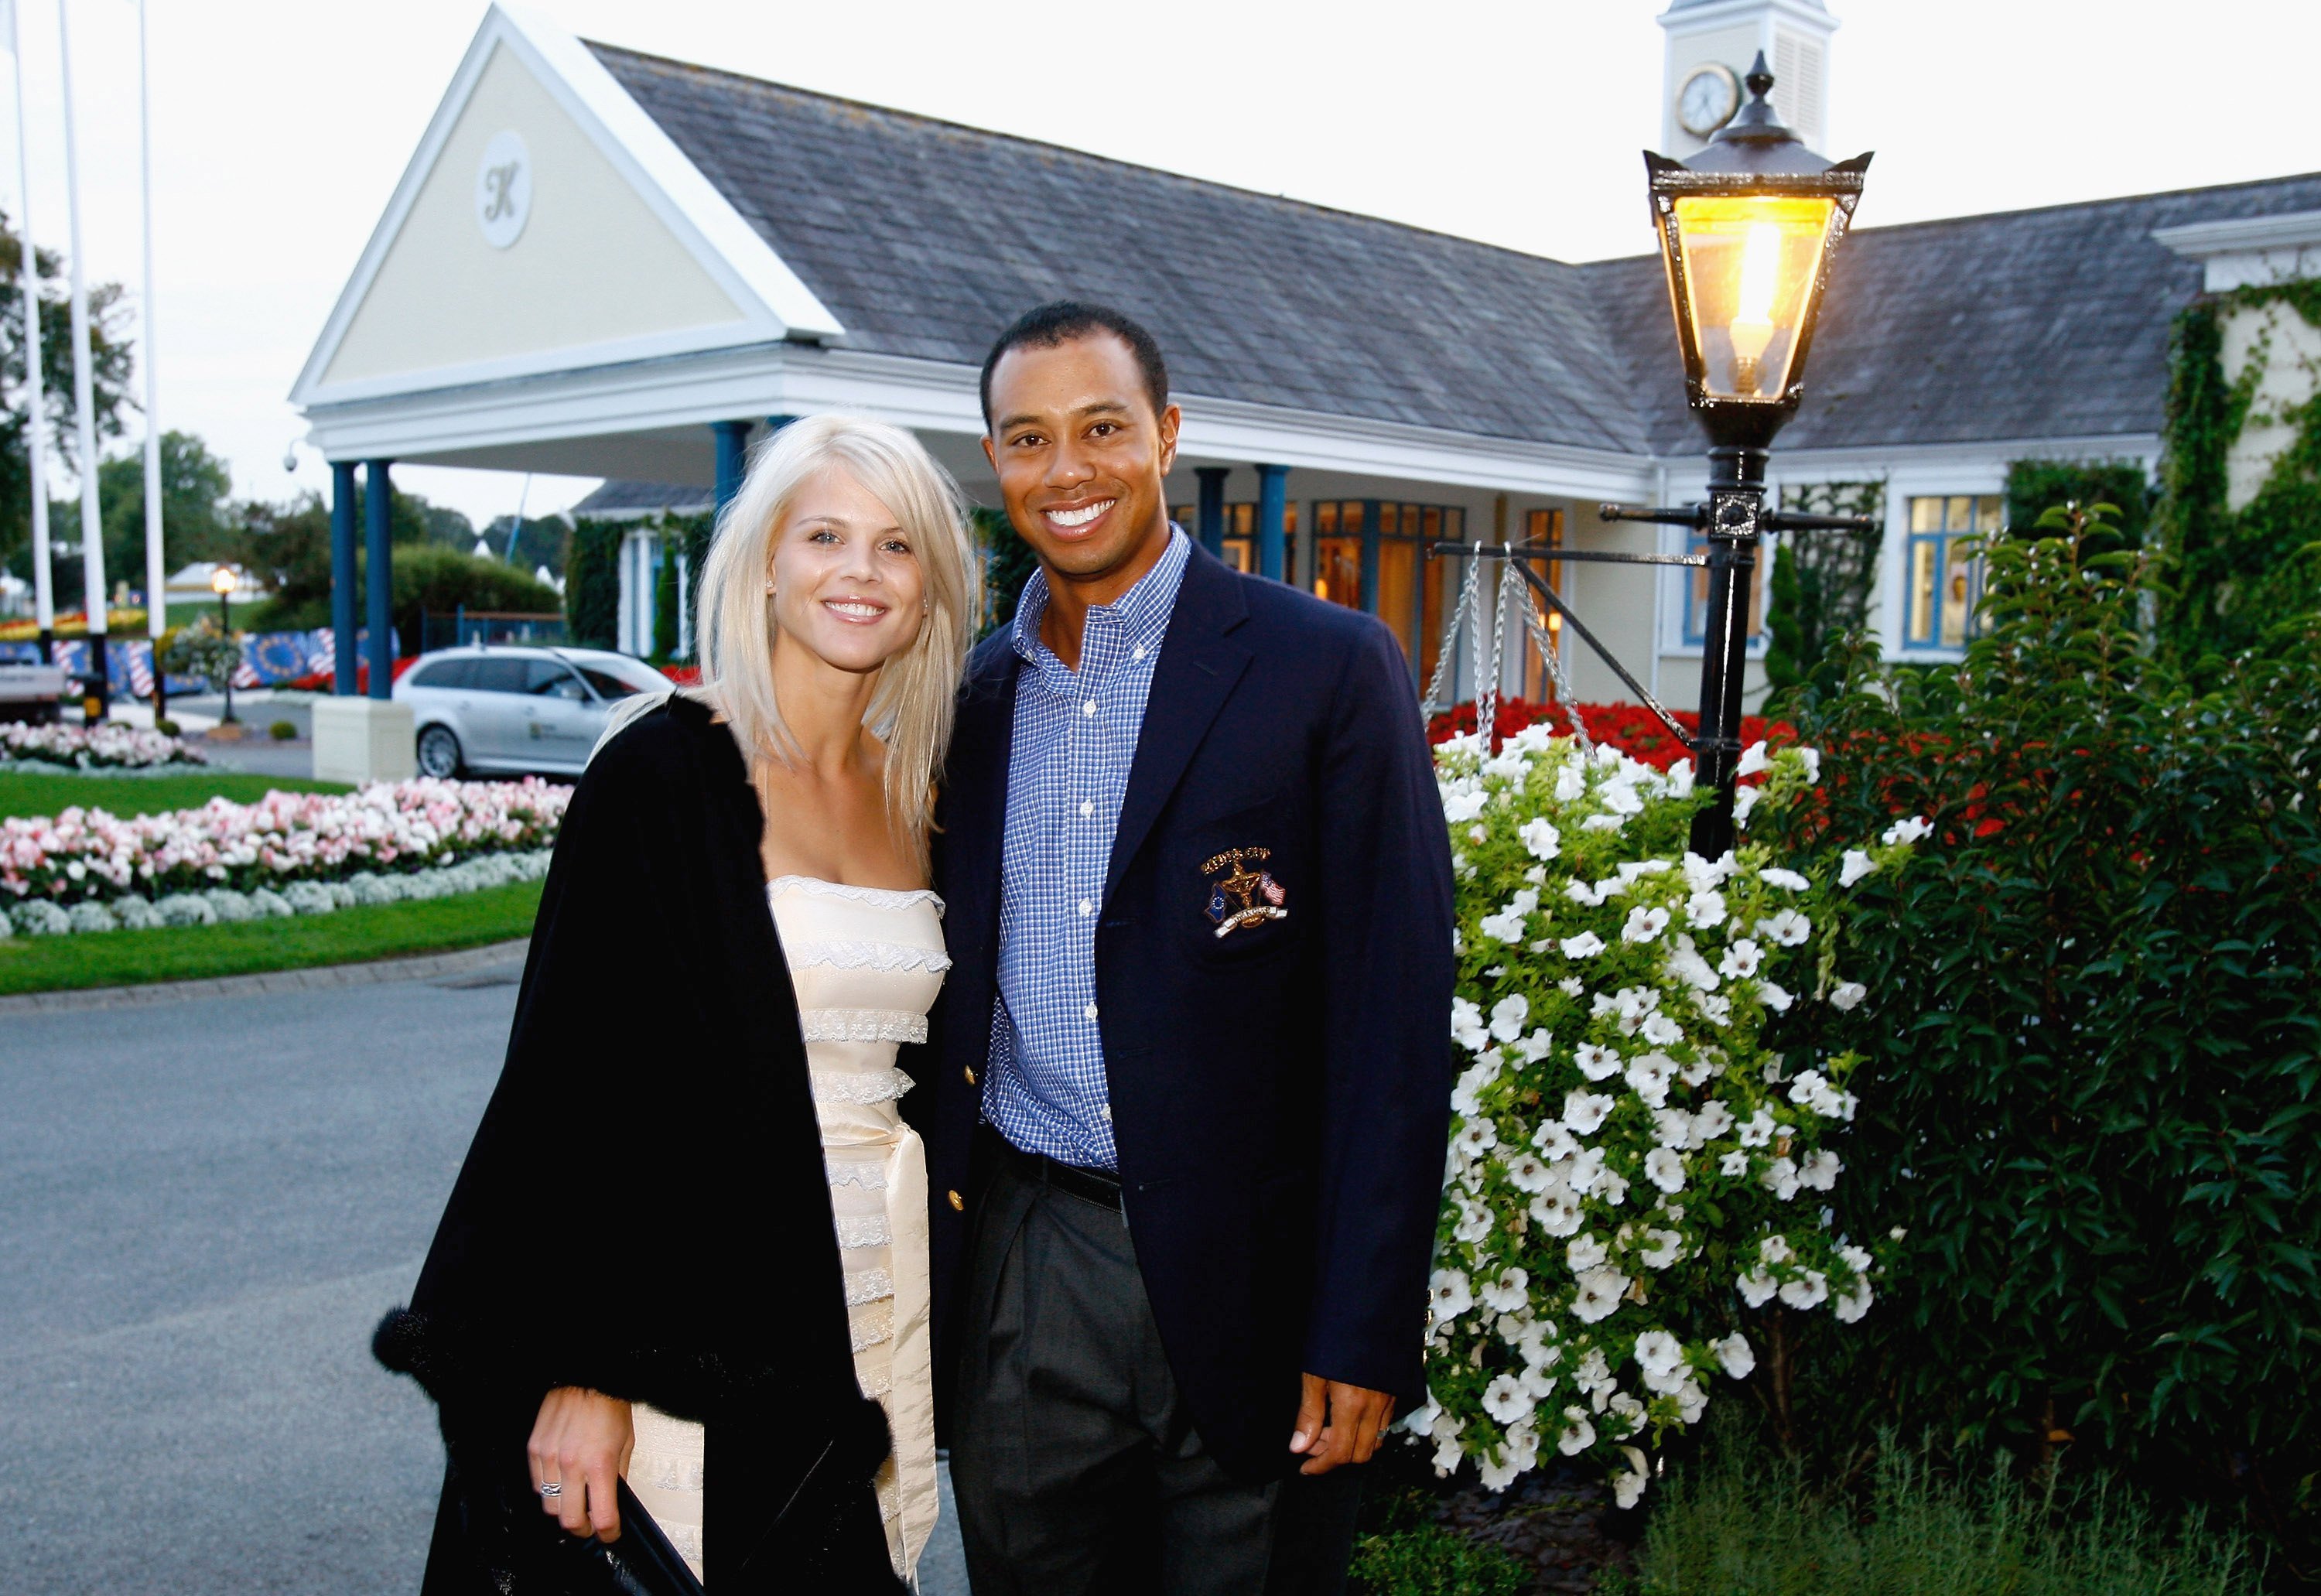 Tiger Woods posing with his wife Elin Nordegren at The Welcome Dinner following the first official practice day of the 2006 Ryder Cup at The K Club on September 19, 2006 in Straffan, Co. Kildare, Ireland. | Source: Getty Images